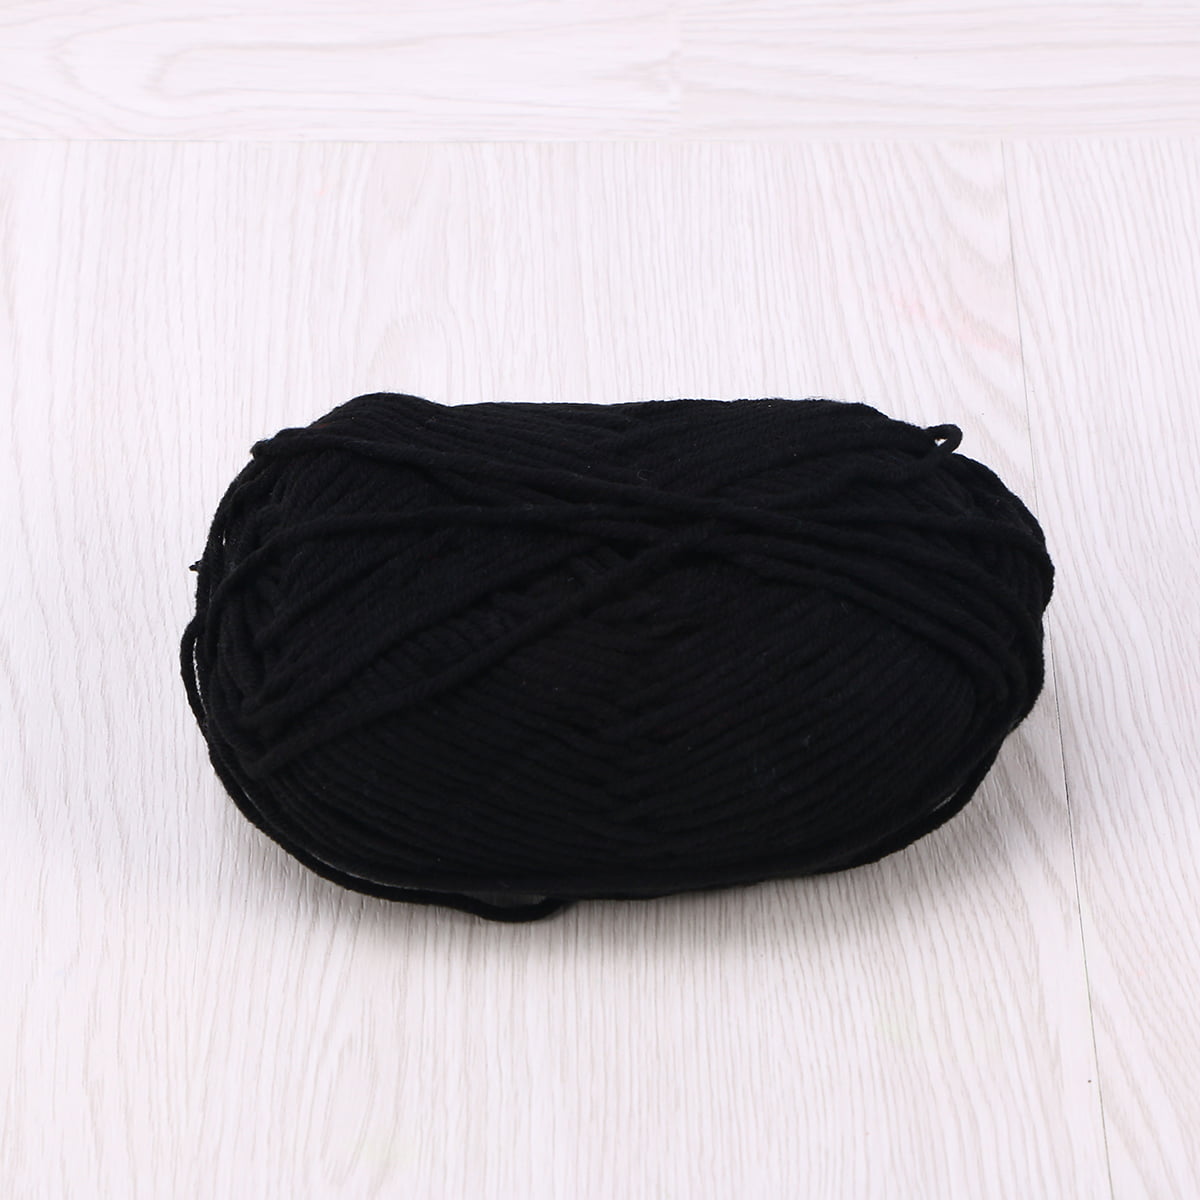 Black and Friday Deals 50% Off Clear Clearance under $10 New Cotton Warm  Soft Natural Knitting Crochet Knitwear Wool Yarn 50g B 